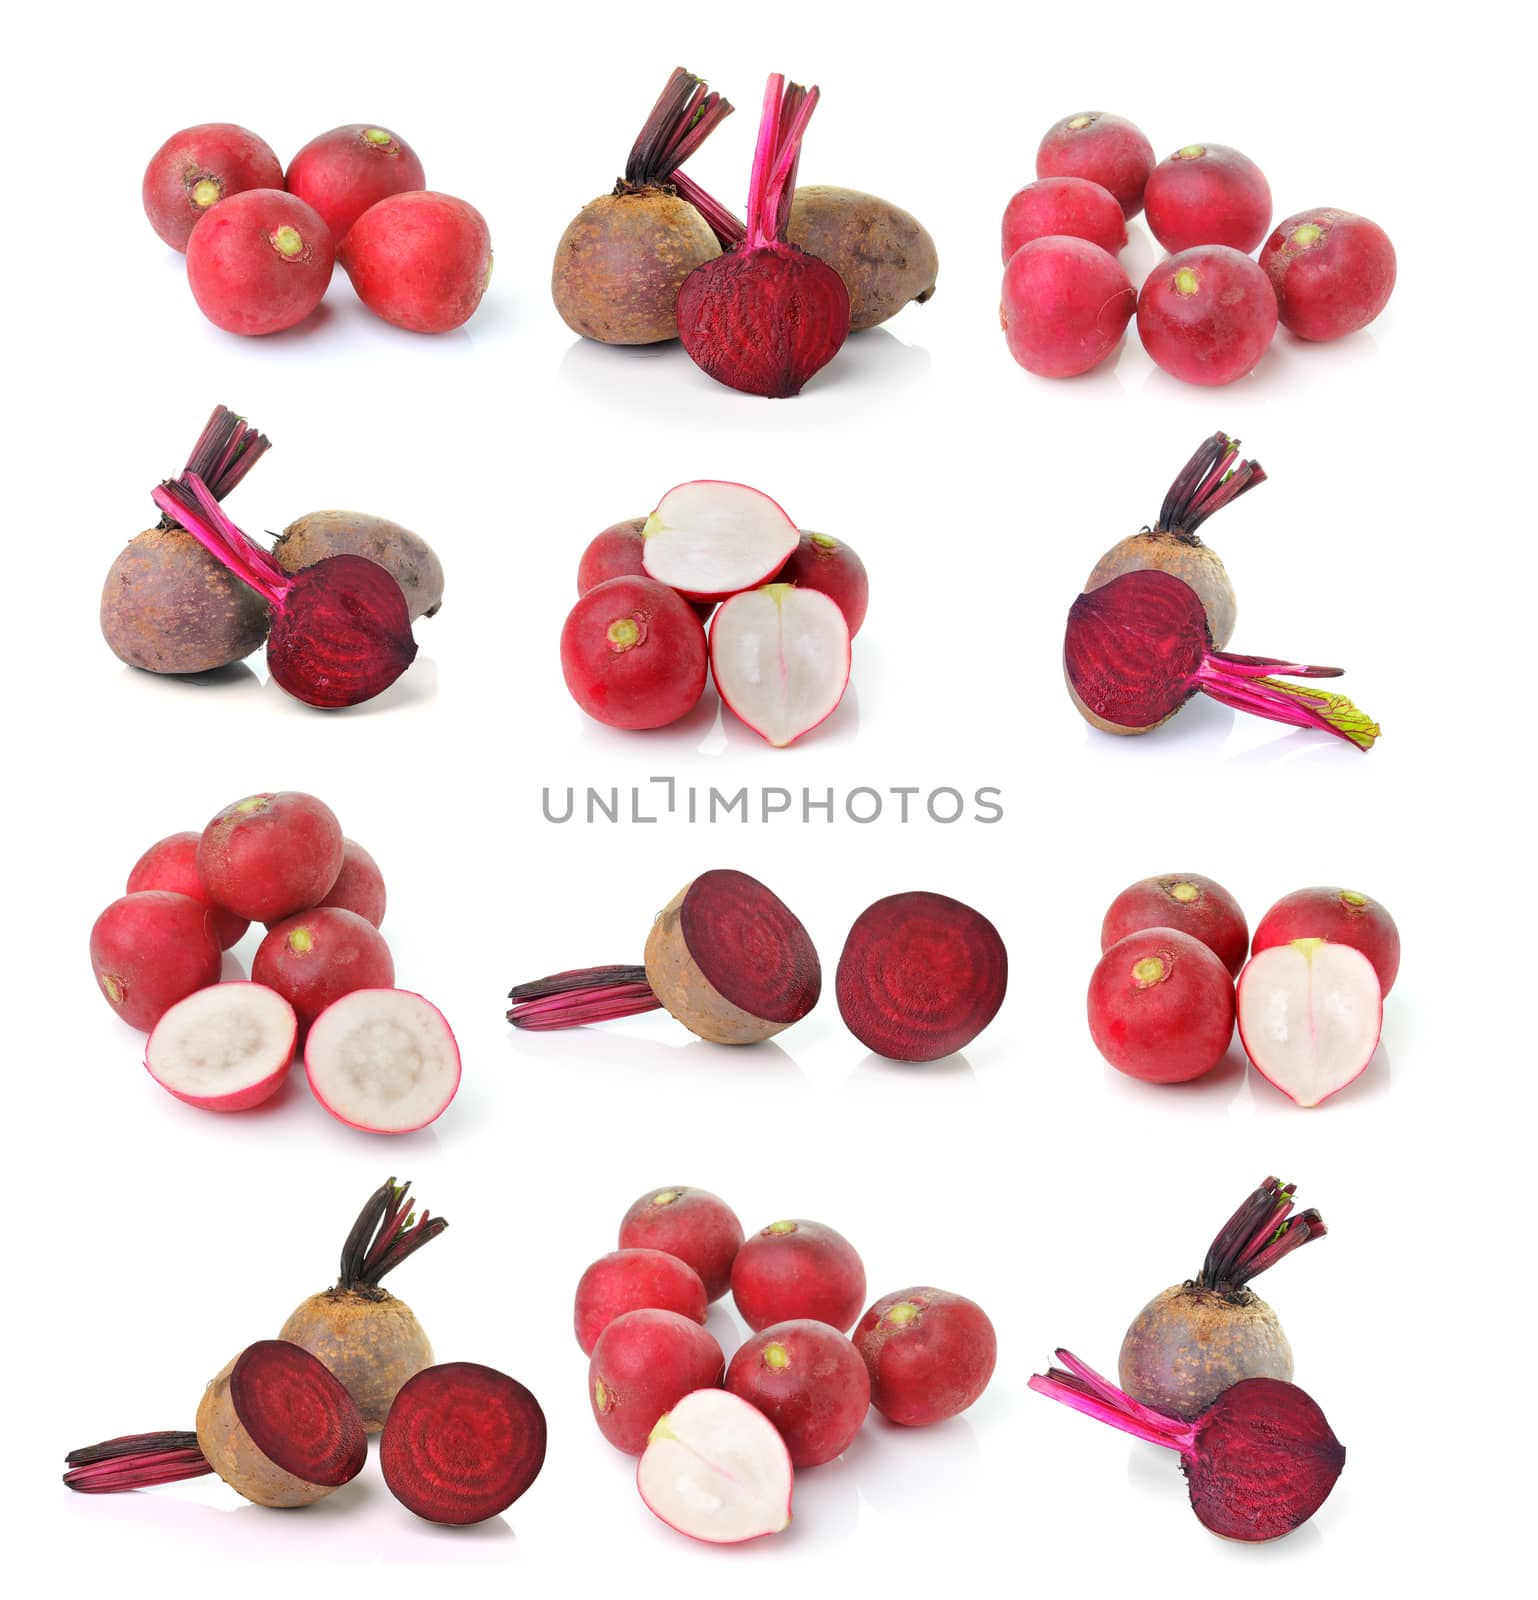 Beetroot and radishes on white background by sommai